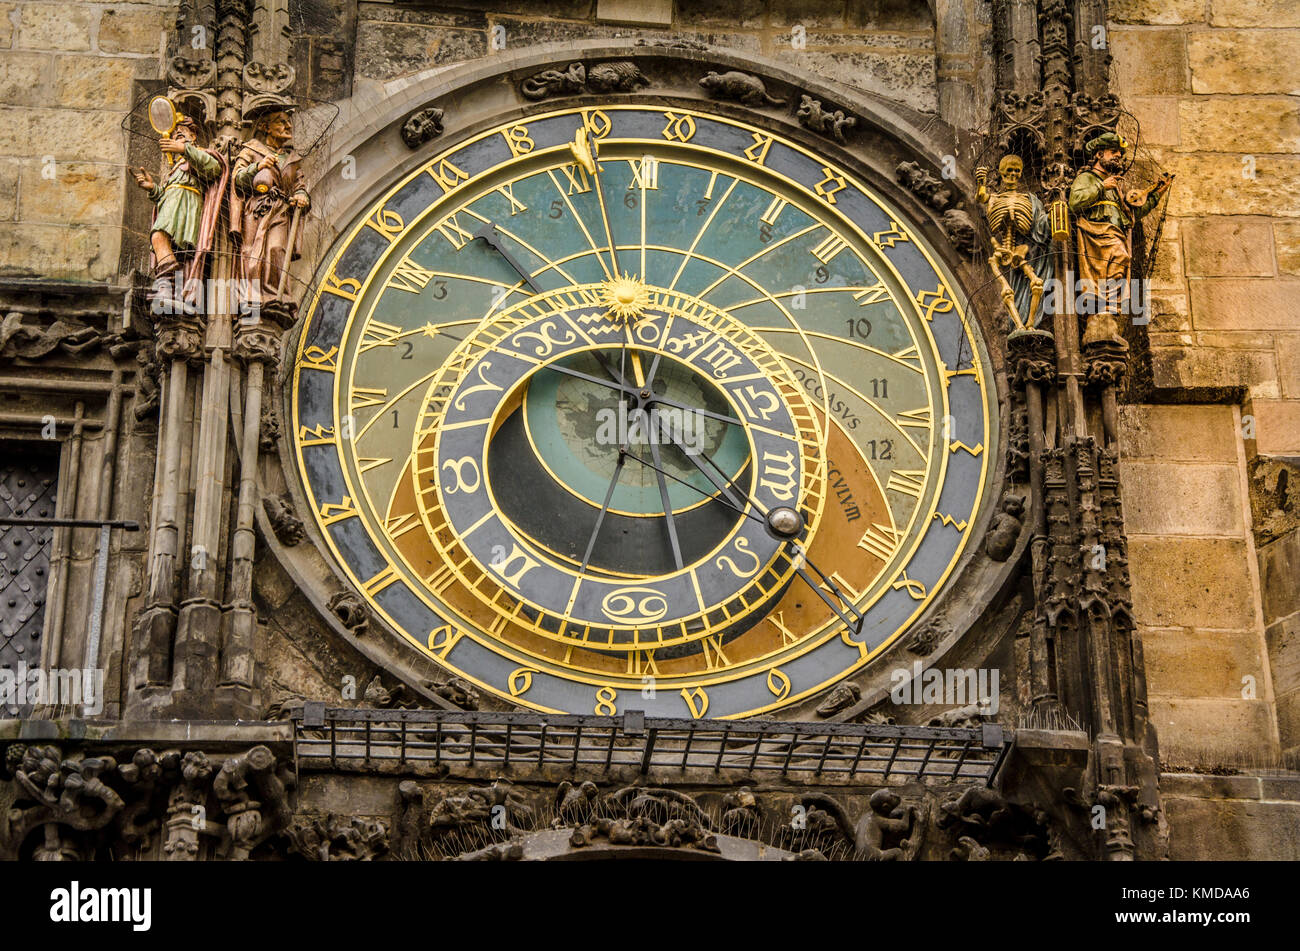 astronomic clock In the main square of the Czech city Stock Photo